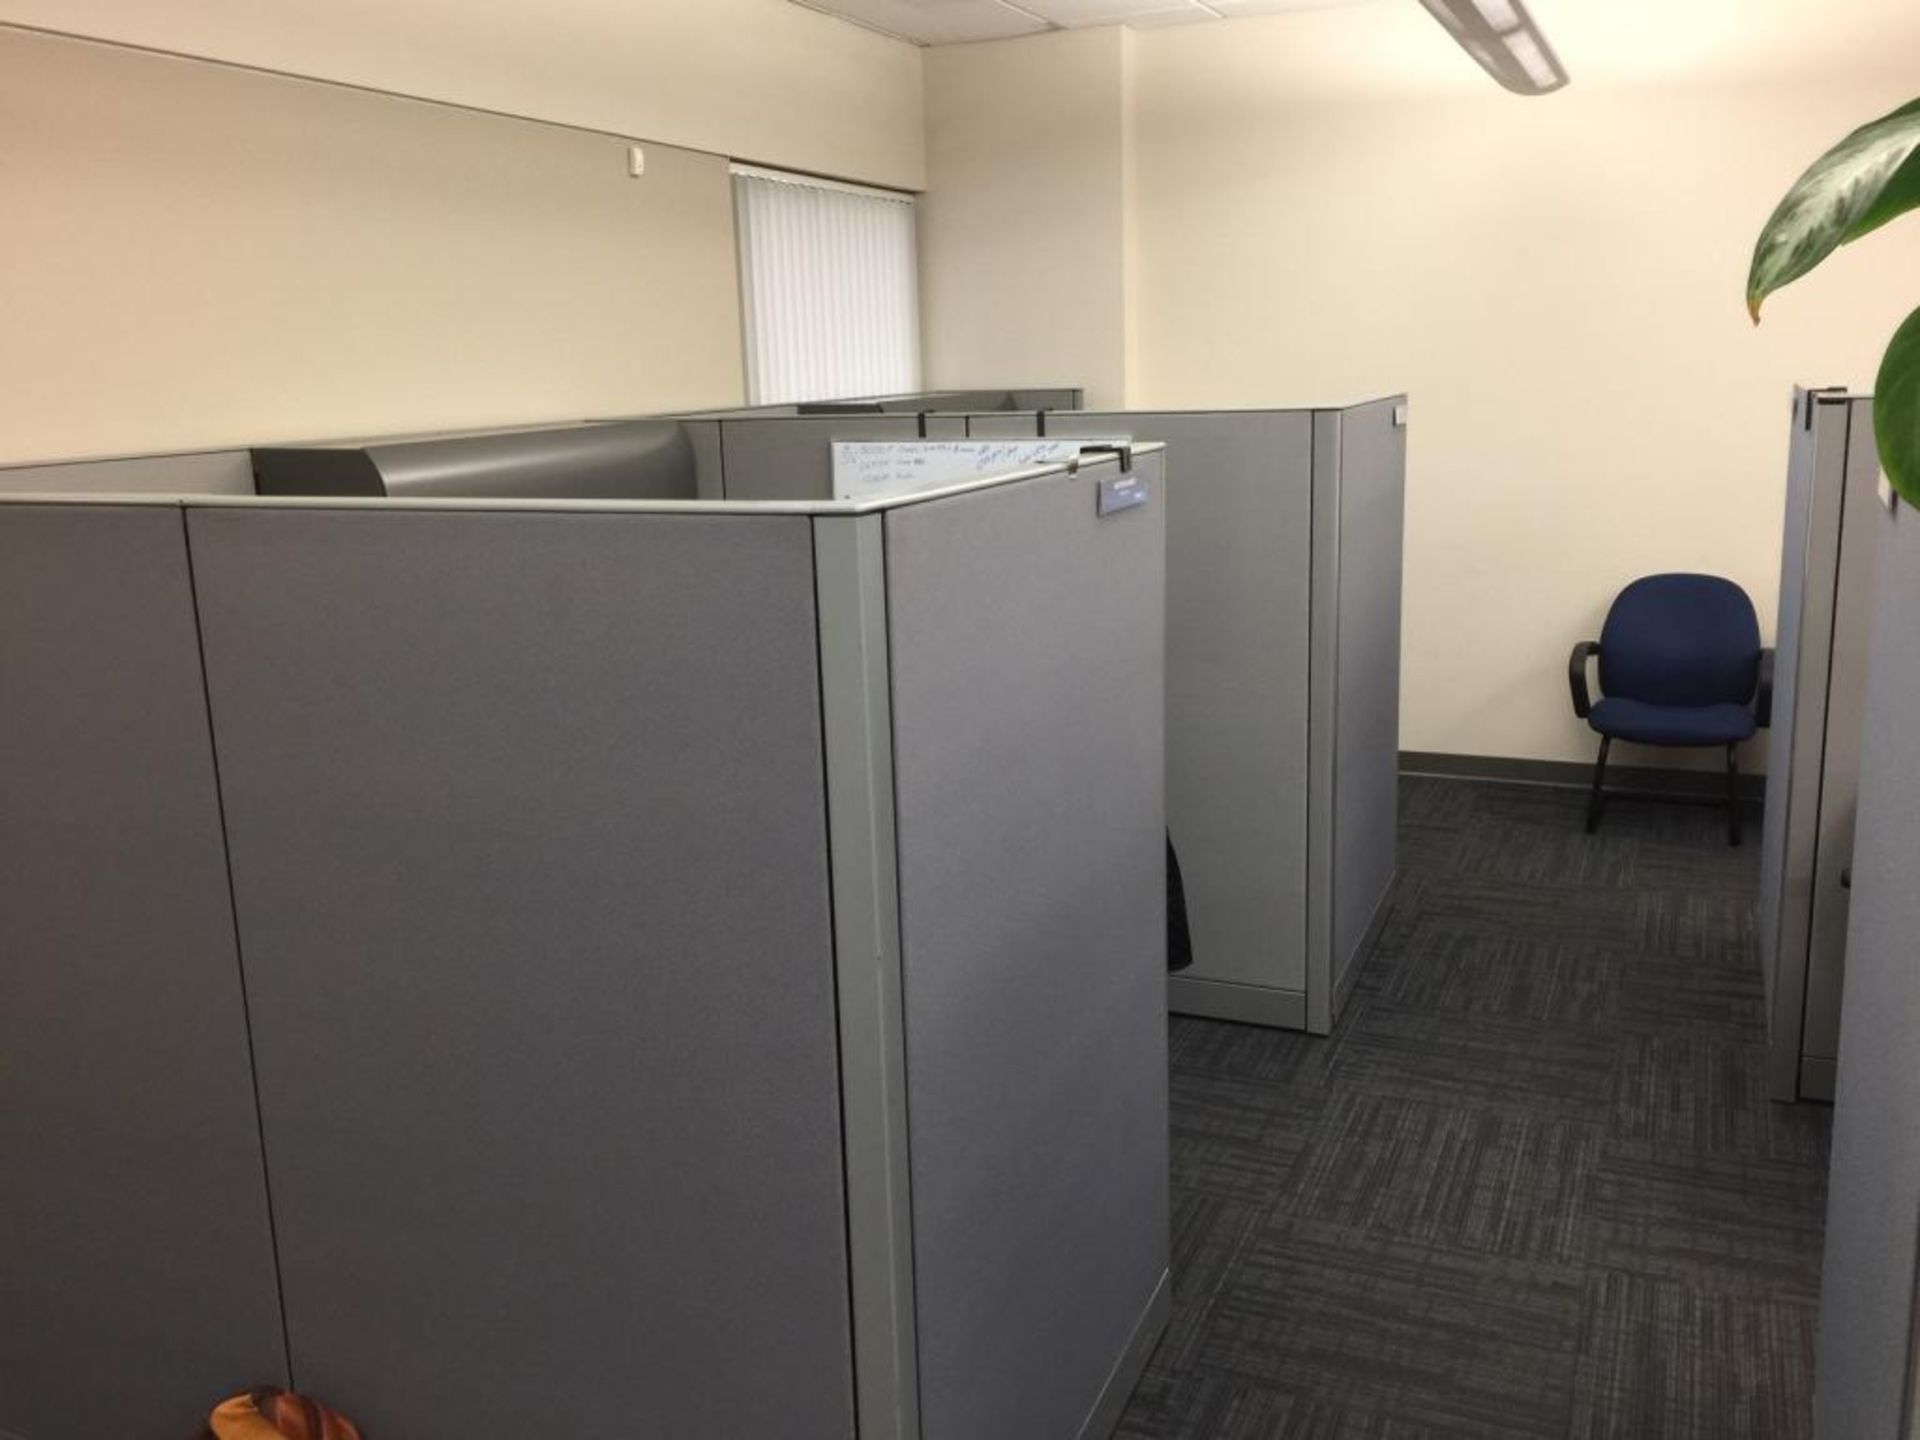 Knoll office cubicles - Image 50 of 51